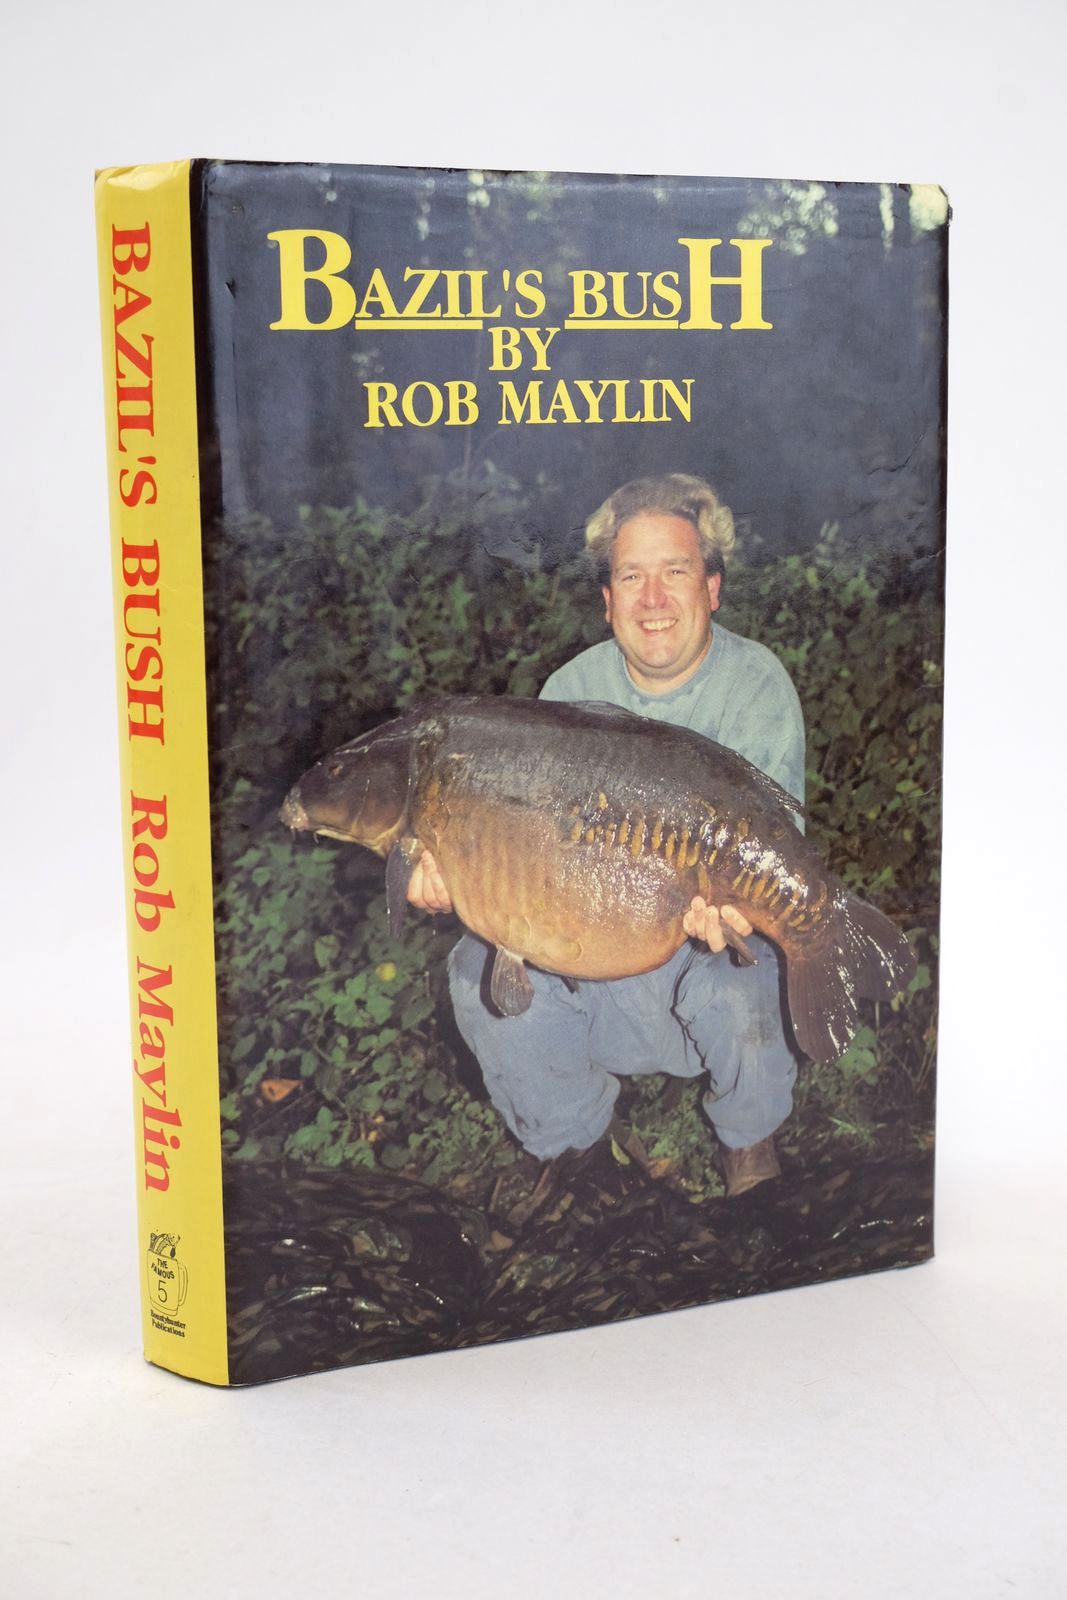 Photo of BAZIL'S BUSH: THE STORY OF A MAN AND HIS OBSESSION written by Maylin, Rob published by Bountyhunter Publications (STOCK CODE: 1327560)  for sale by Stella & Rose's Books